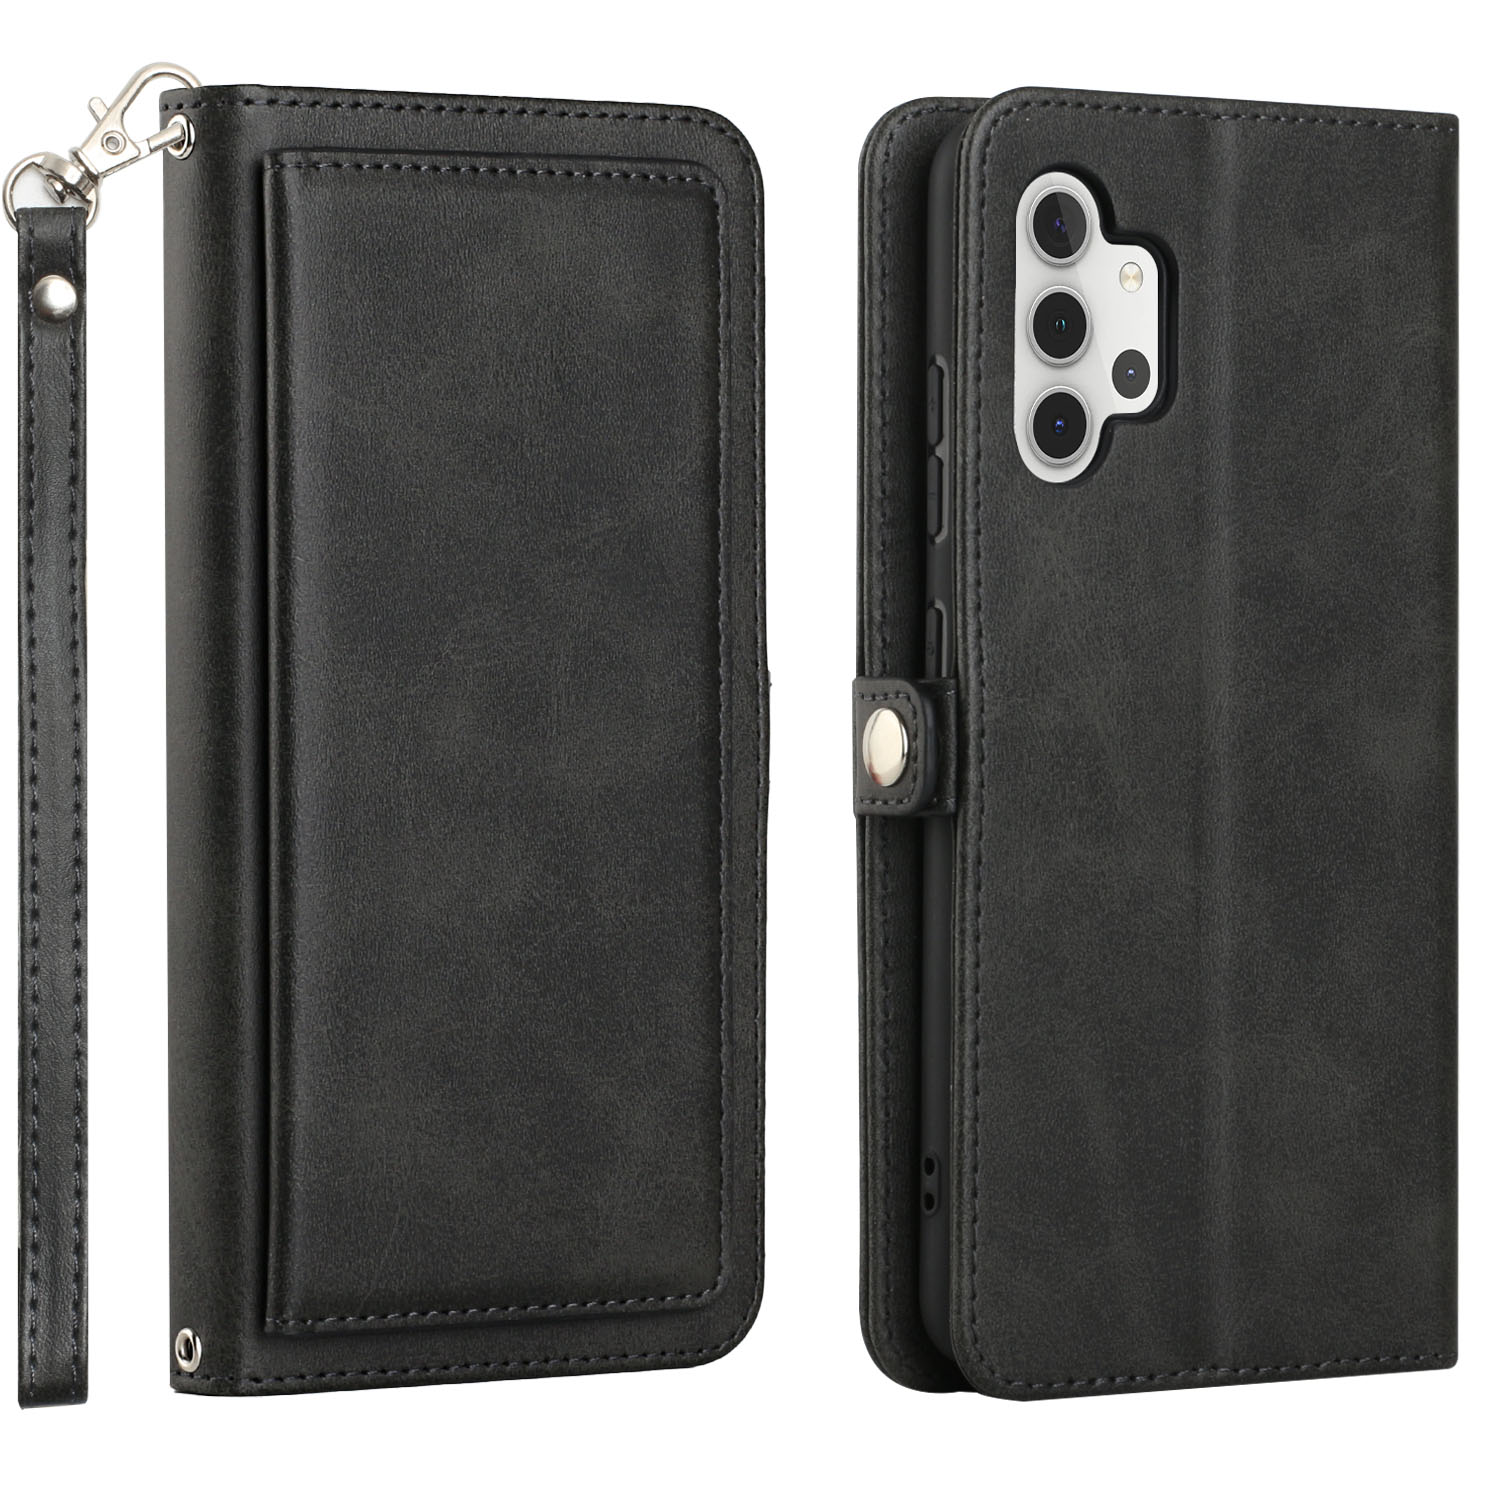 Premium PU Leather Folio WALLET Front Cover Case for Galaxy A32 4G (Black)